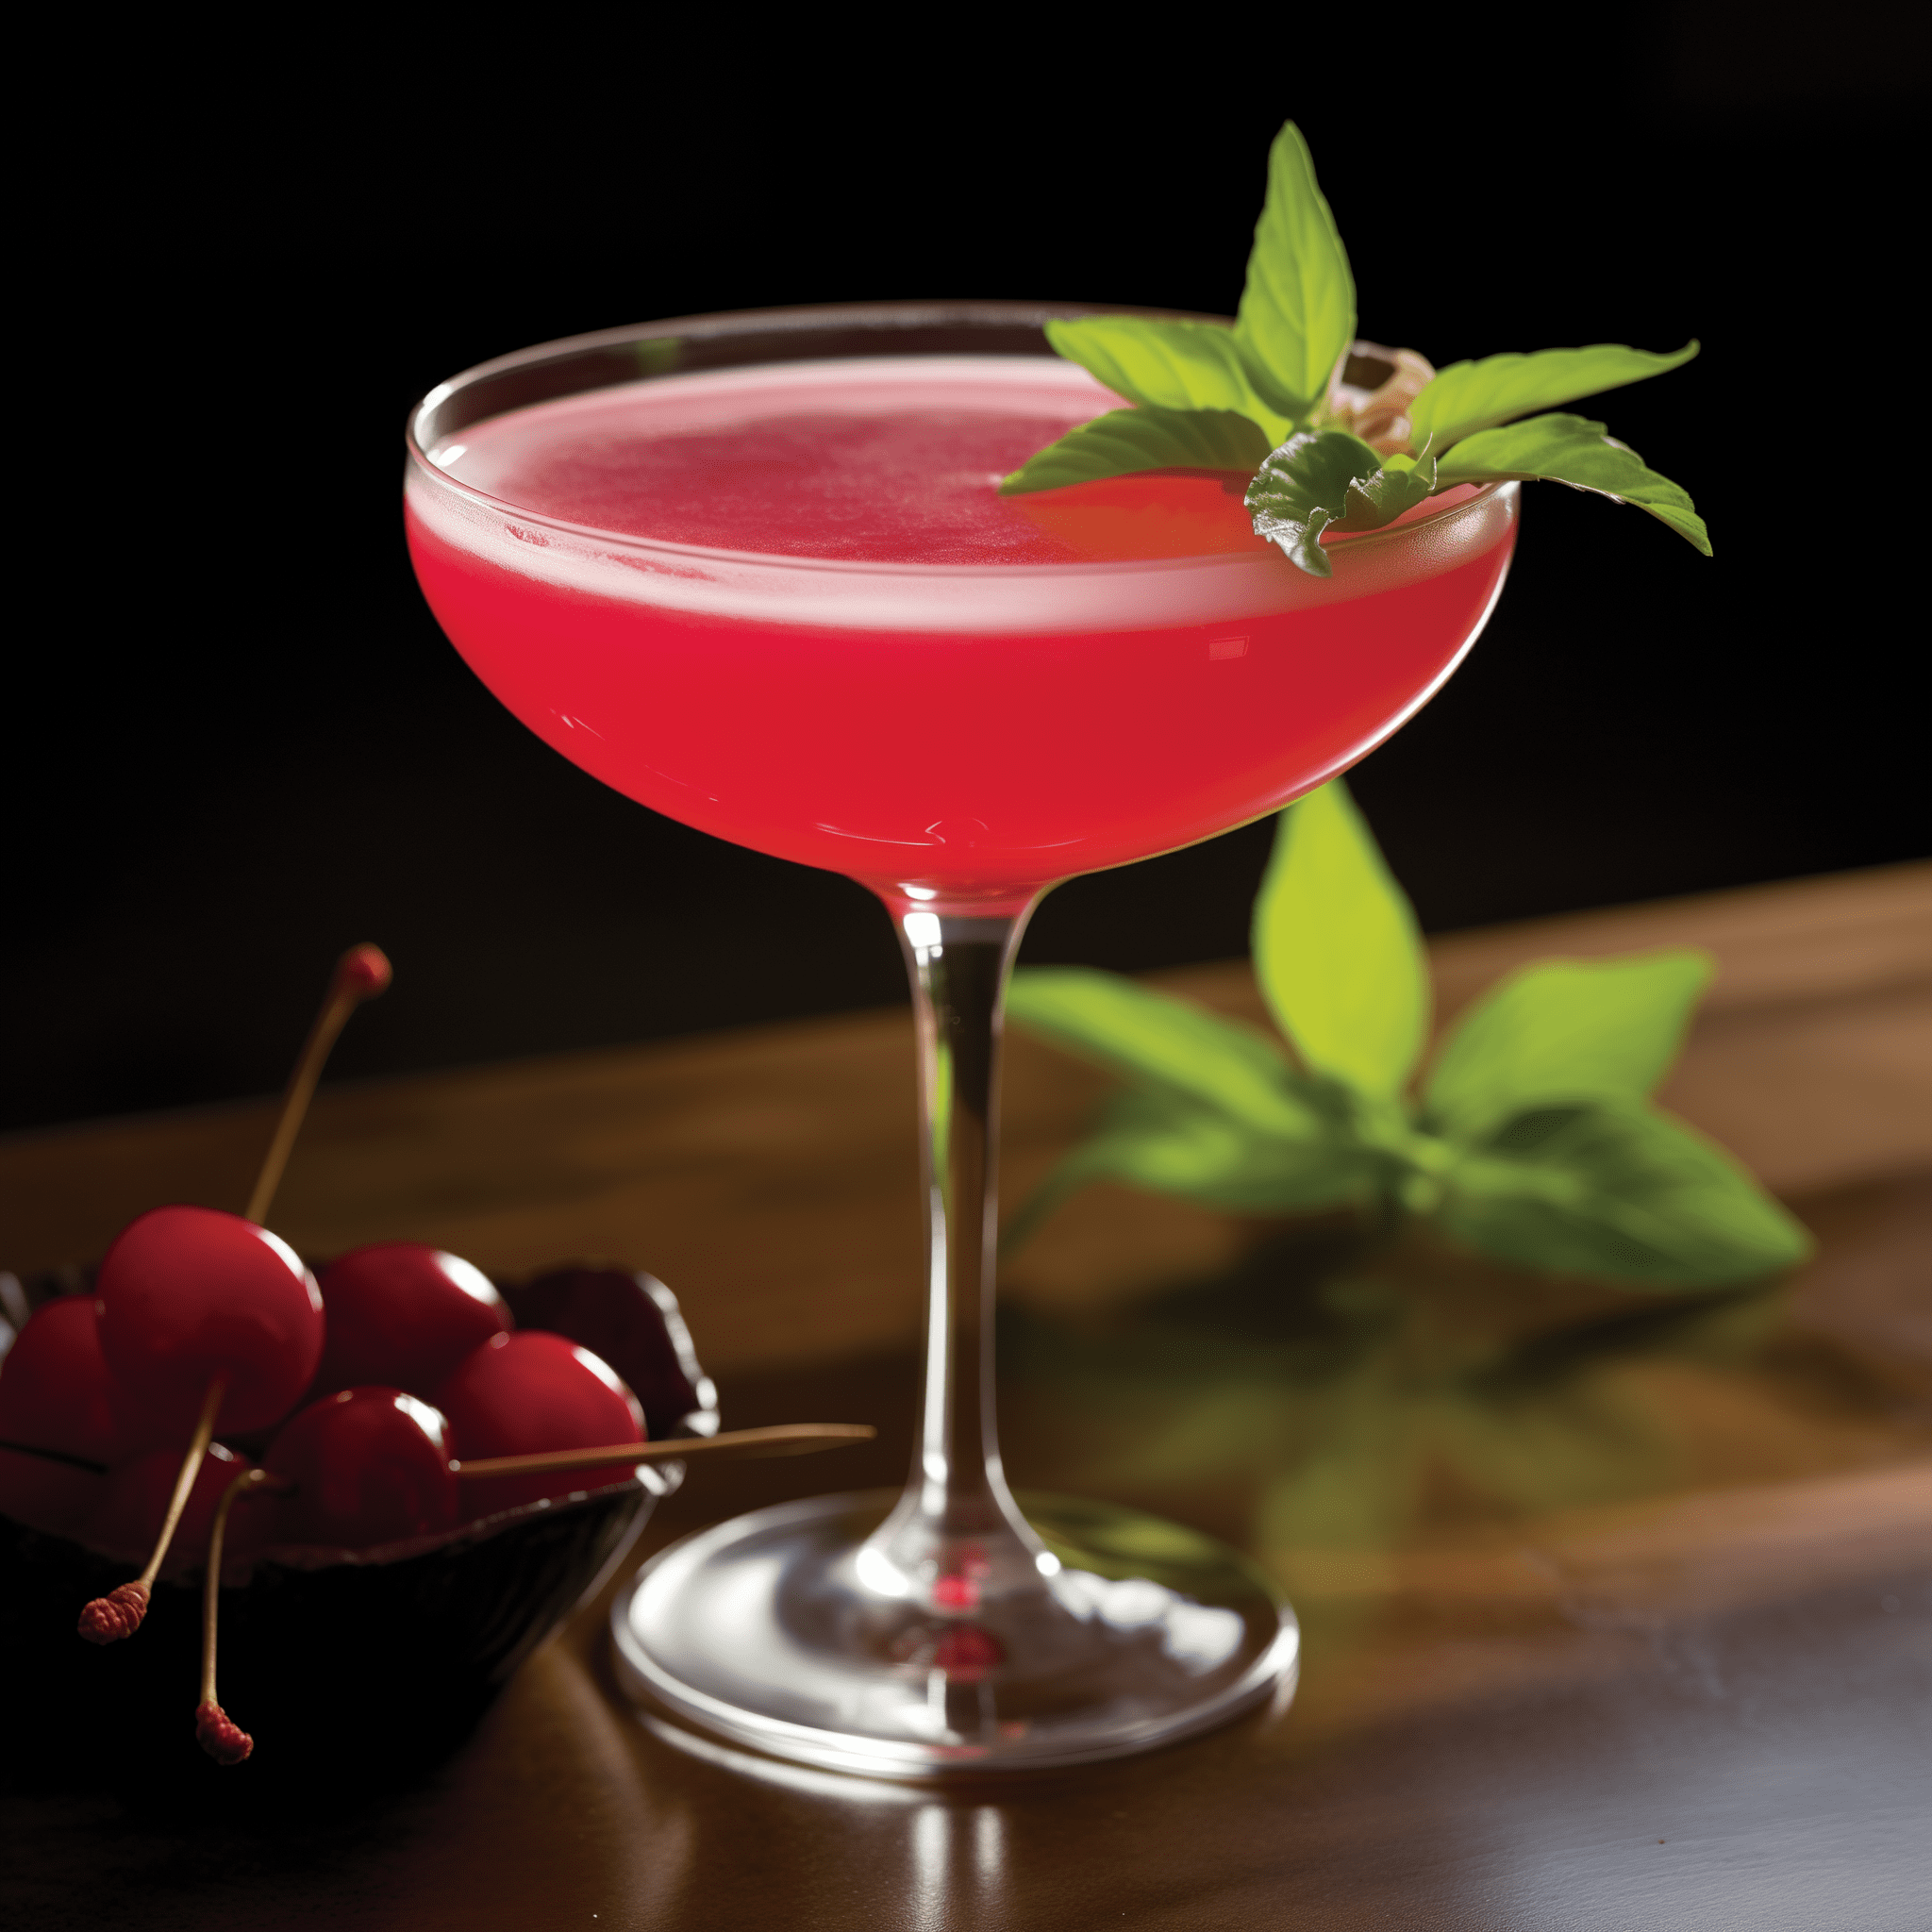 Cherry Sage Gimlet Cocktail Recipe - The Cherry Sage Gimlet offers a harmonious blend of tartness from the lime, a subtle sweetness from the cherries, and a complex herbal backdrop from the sage. It's a refreshing cocktail with a sophisticated edge, perfect for sipping slowly.